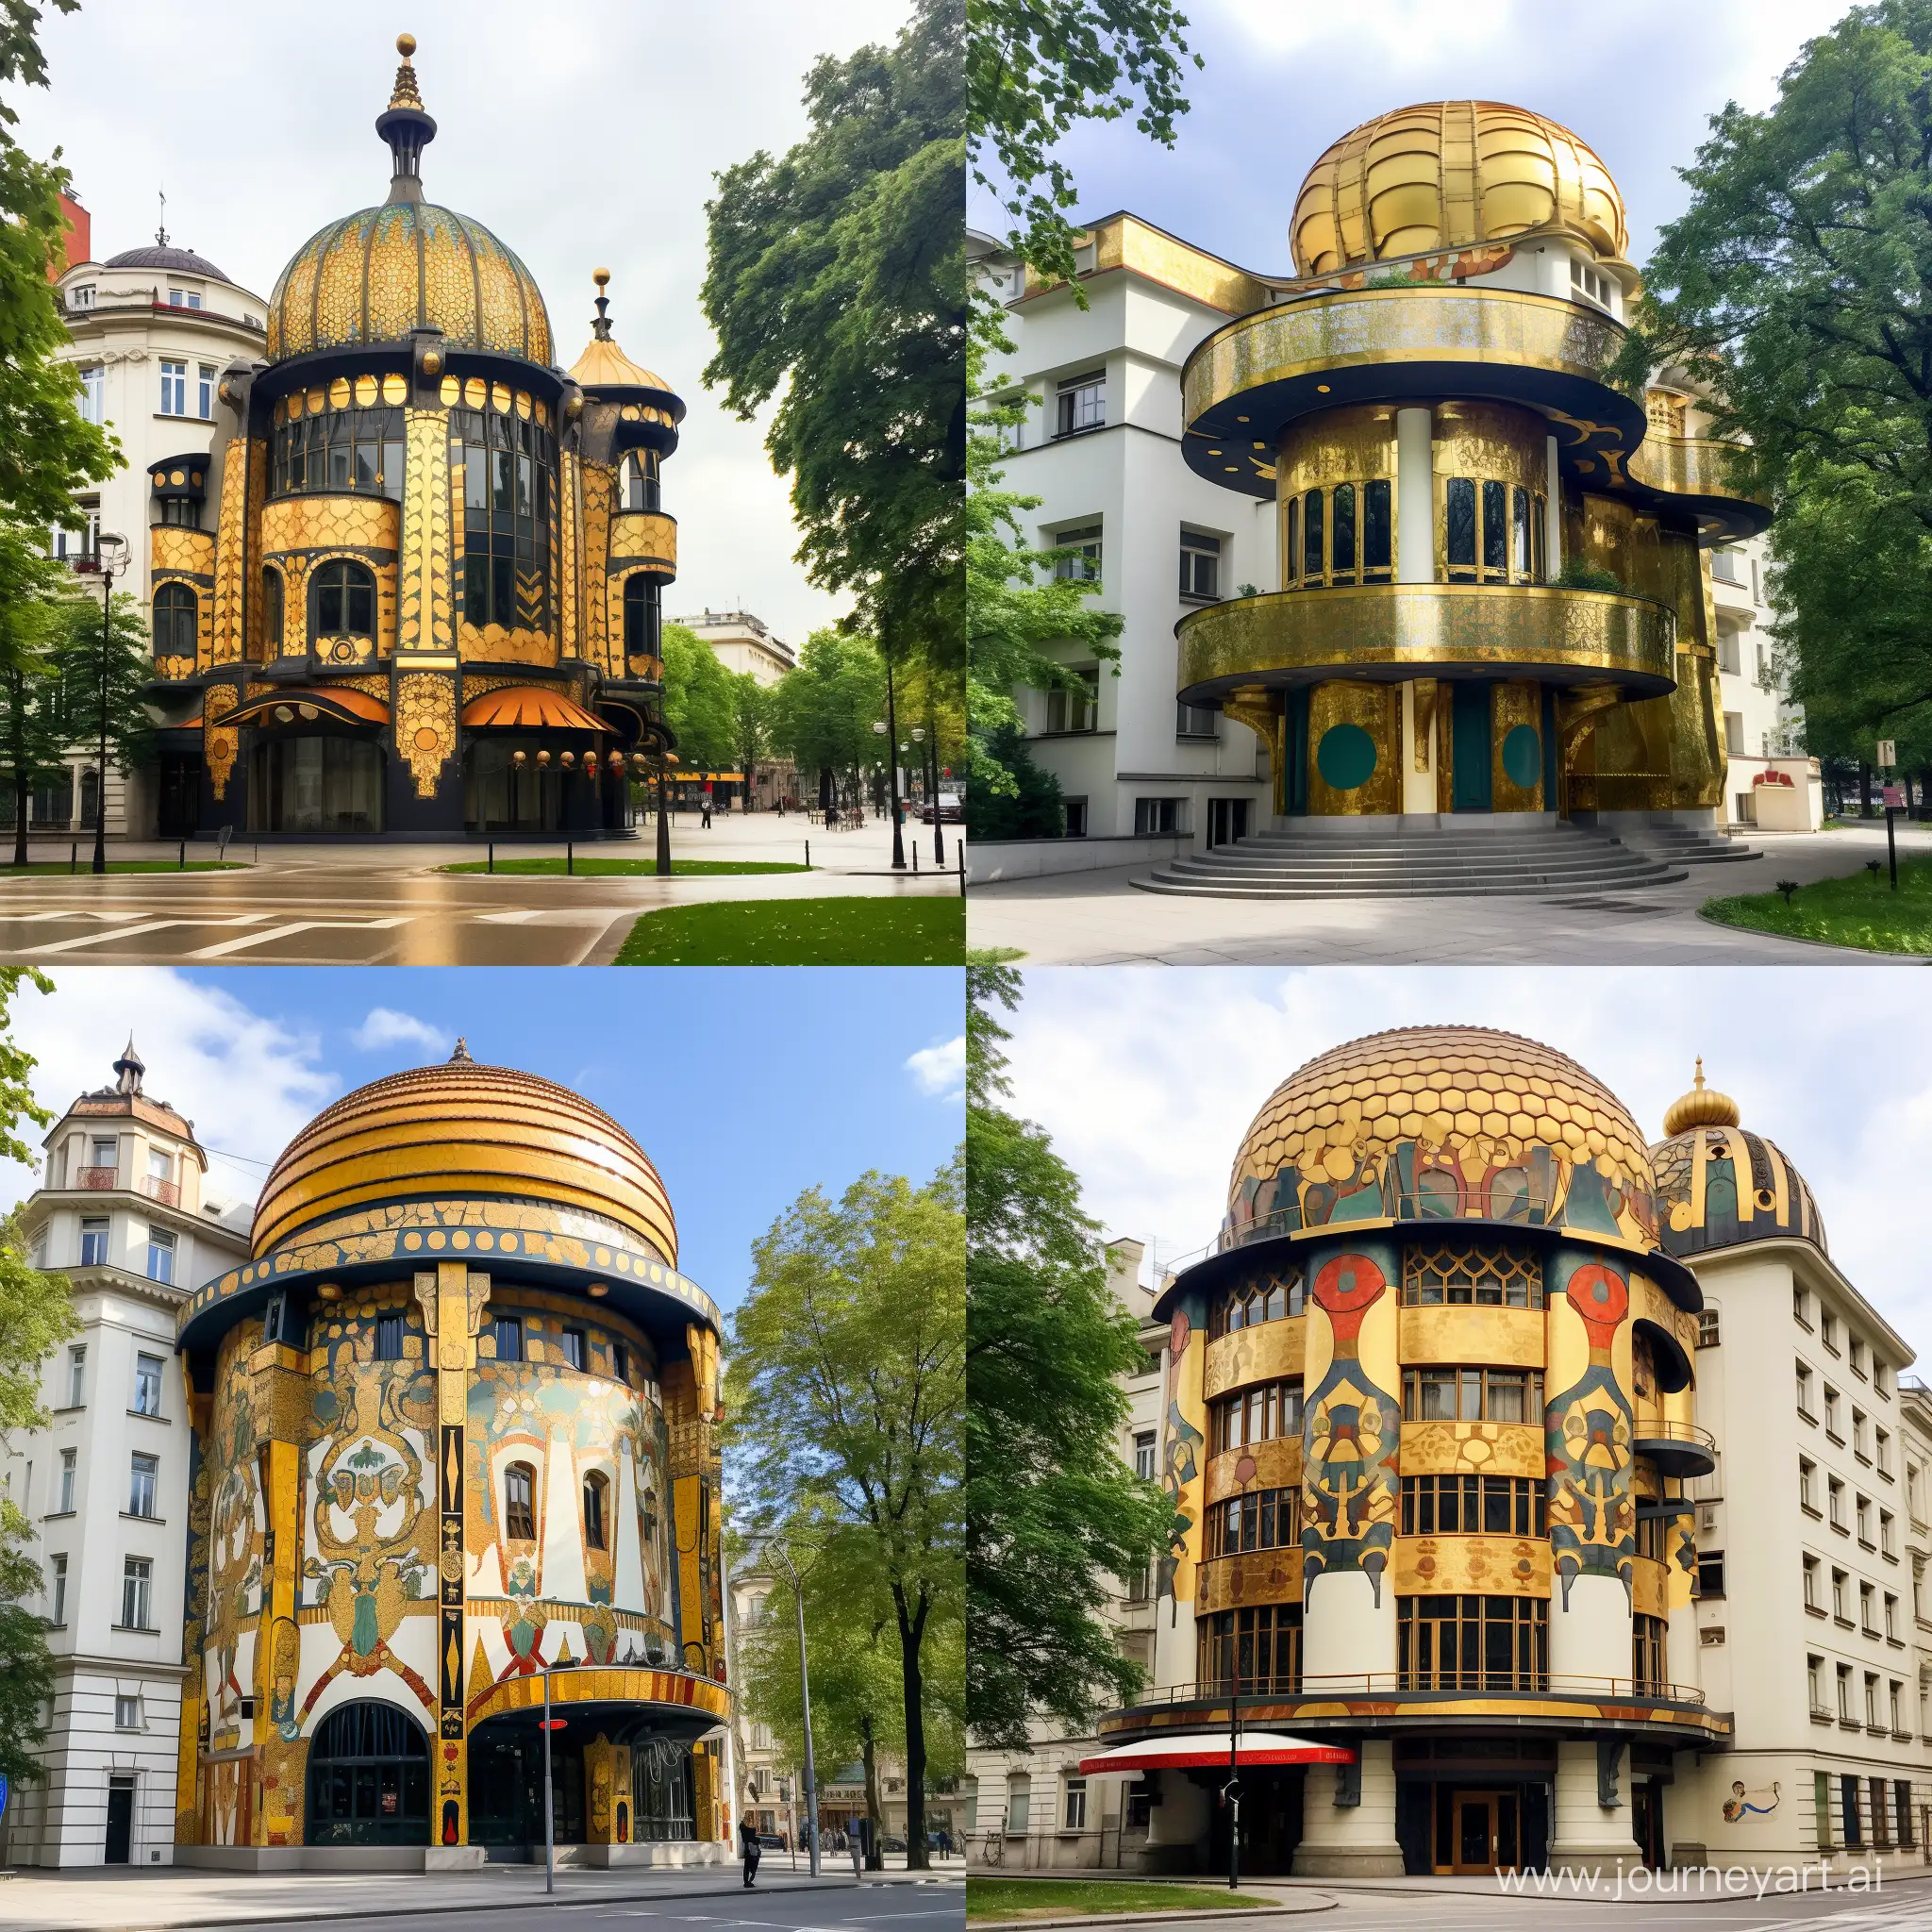 Vienna-Secession-Museum-with-Golden-Dome-in-Gustav-Klimt-Style